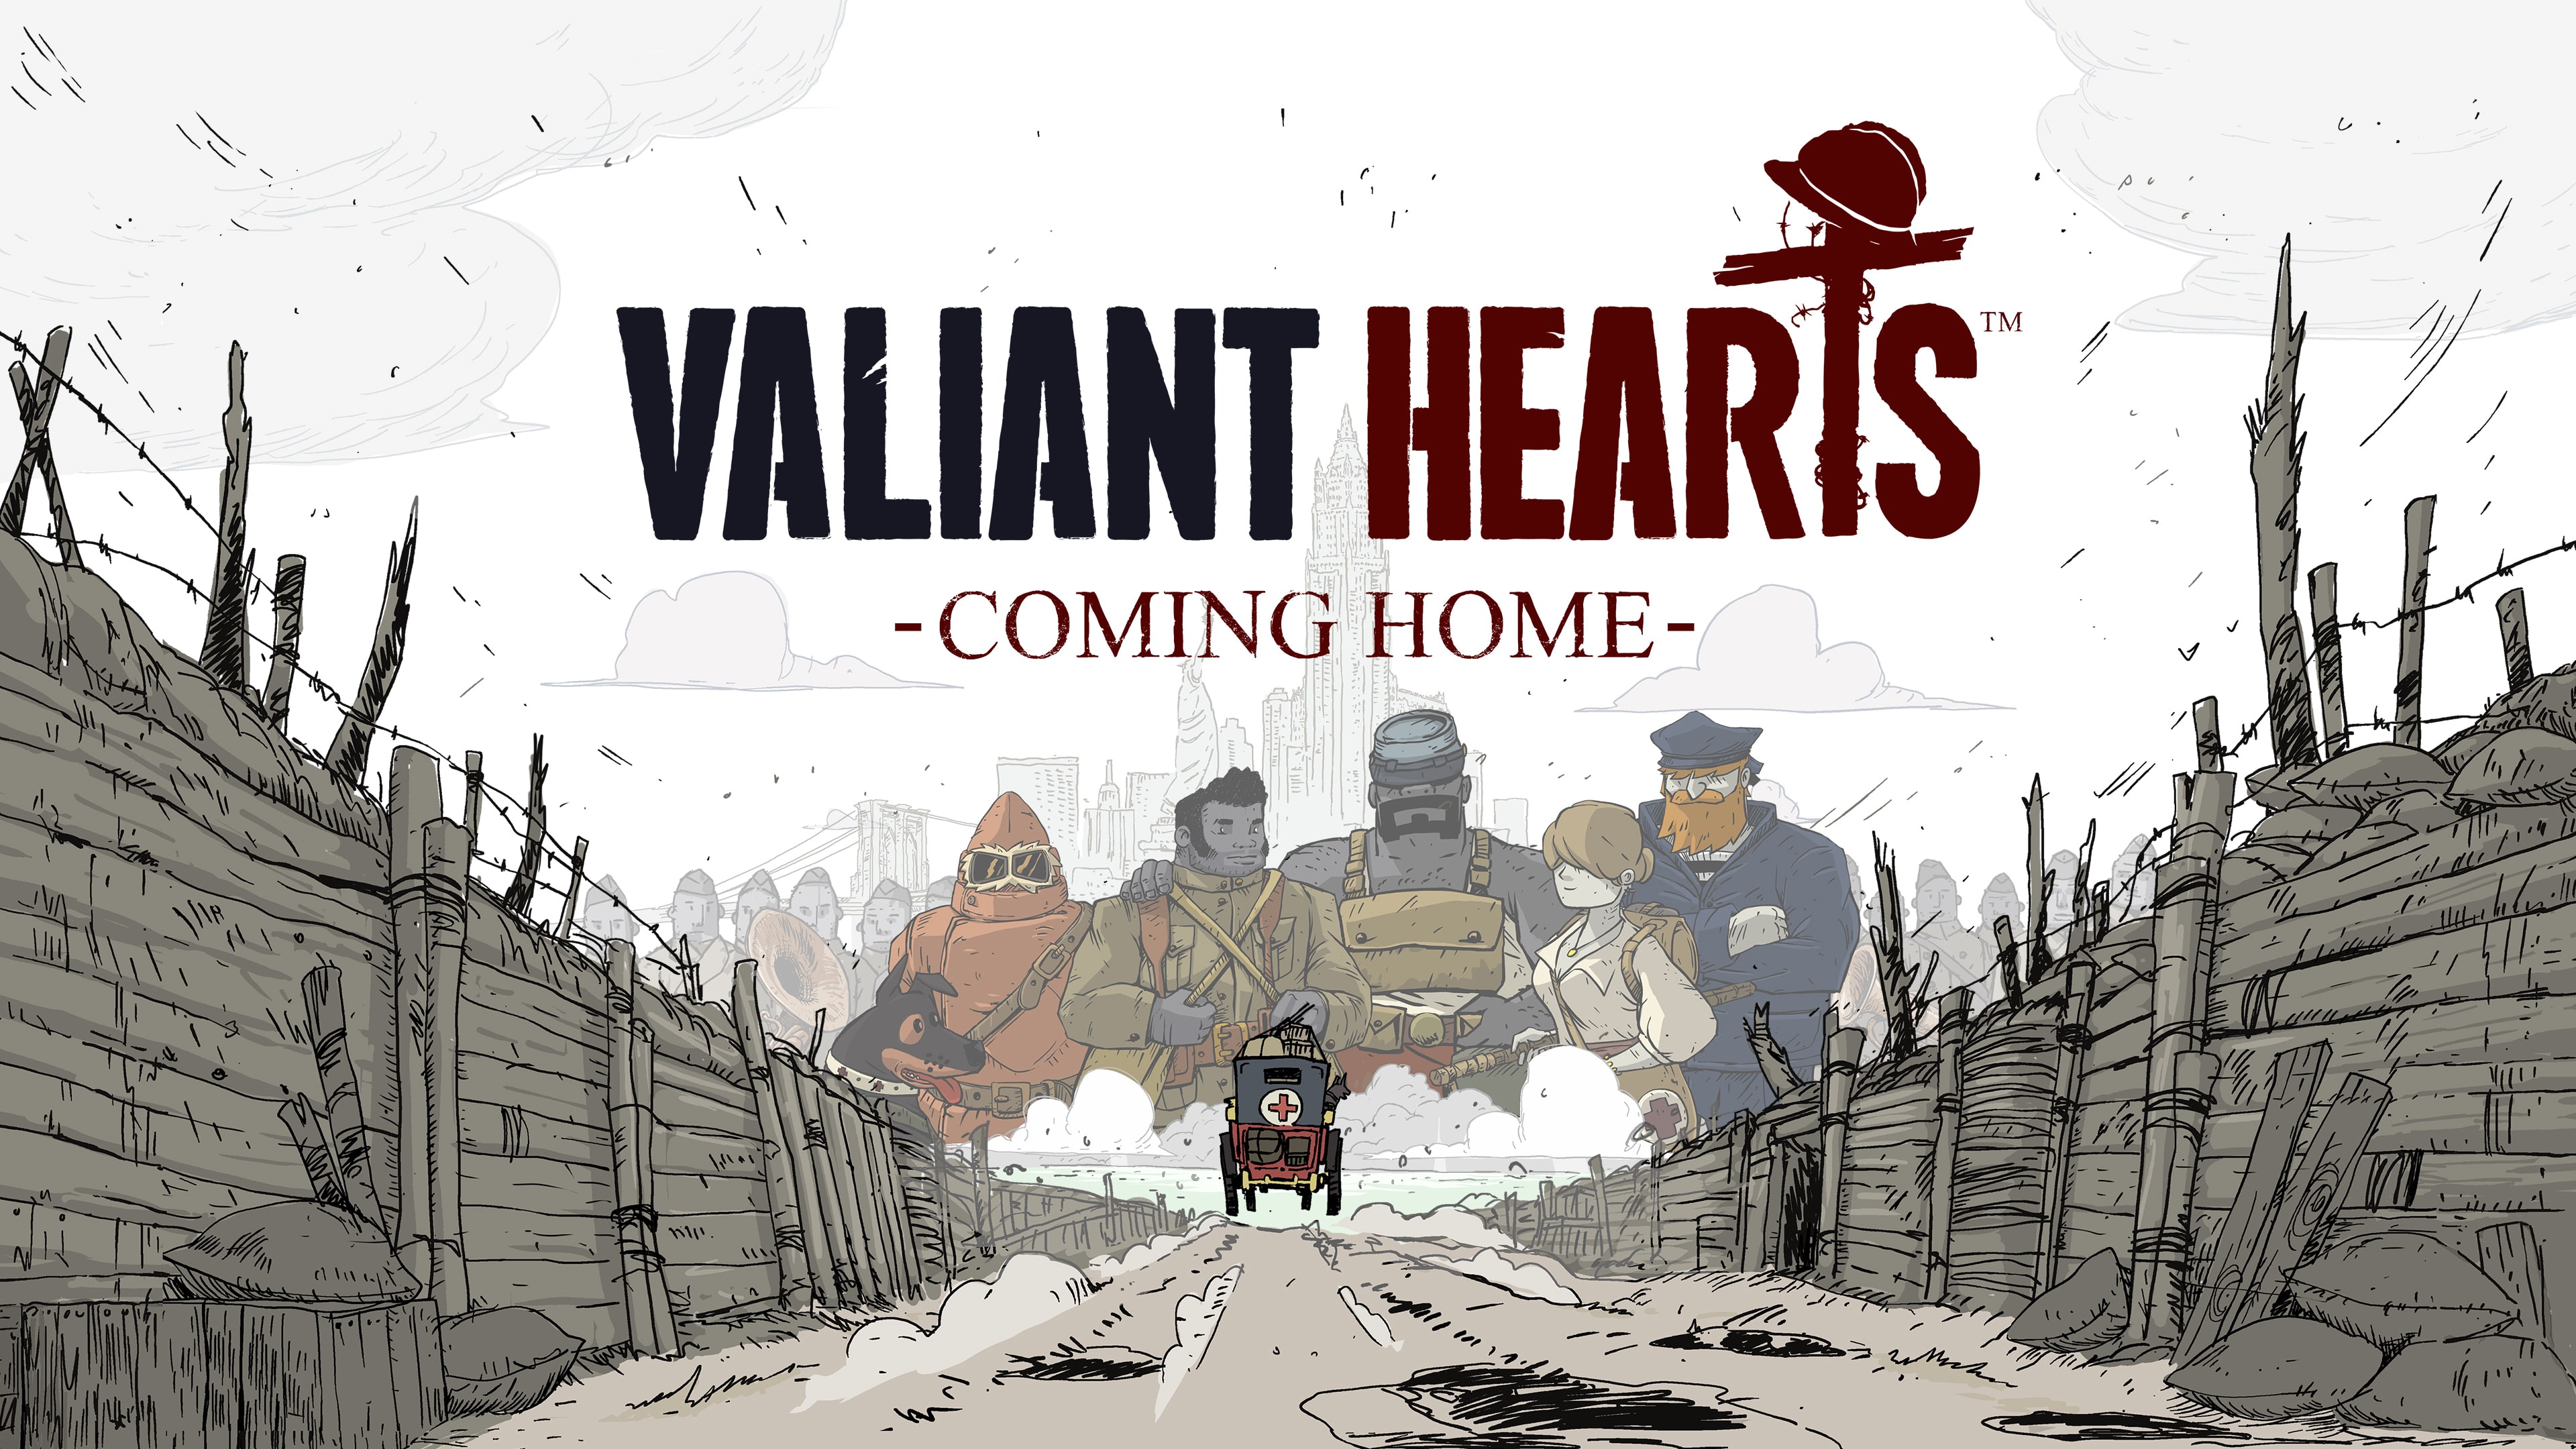 Valiant Hearts: Coming Home (Simplified Chinese, English, Korean, Thai, Japanese, Traditional Chinese)